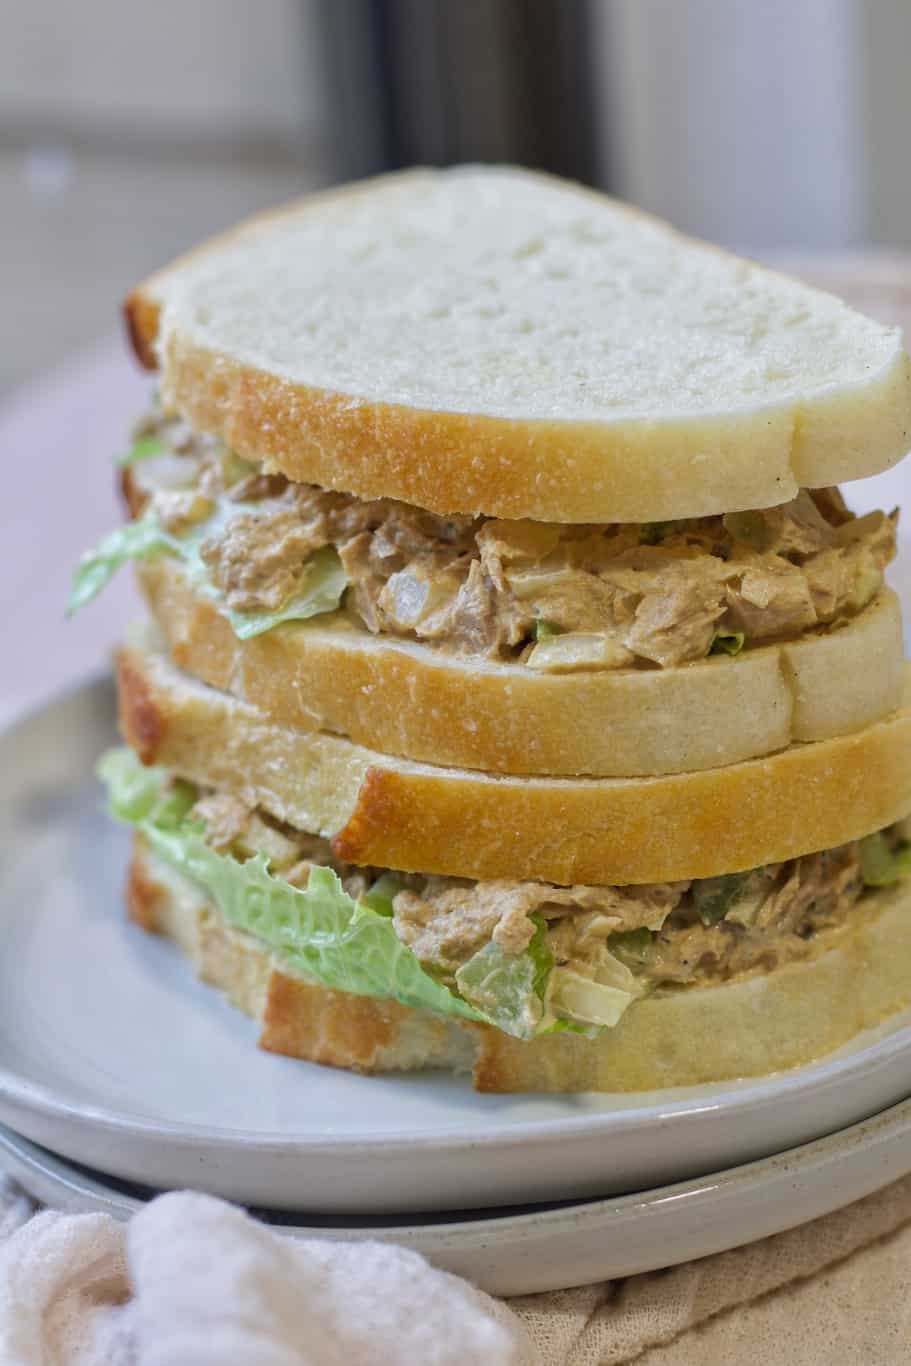 layers of crunchy bread stuffed with jimmy John's tuna salad and iceberg lettuce leaves